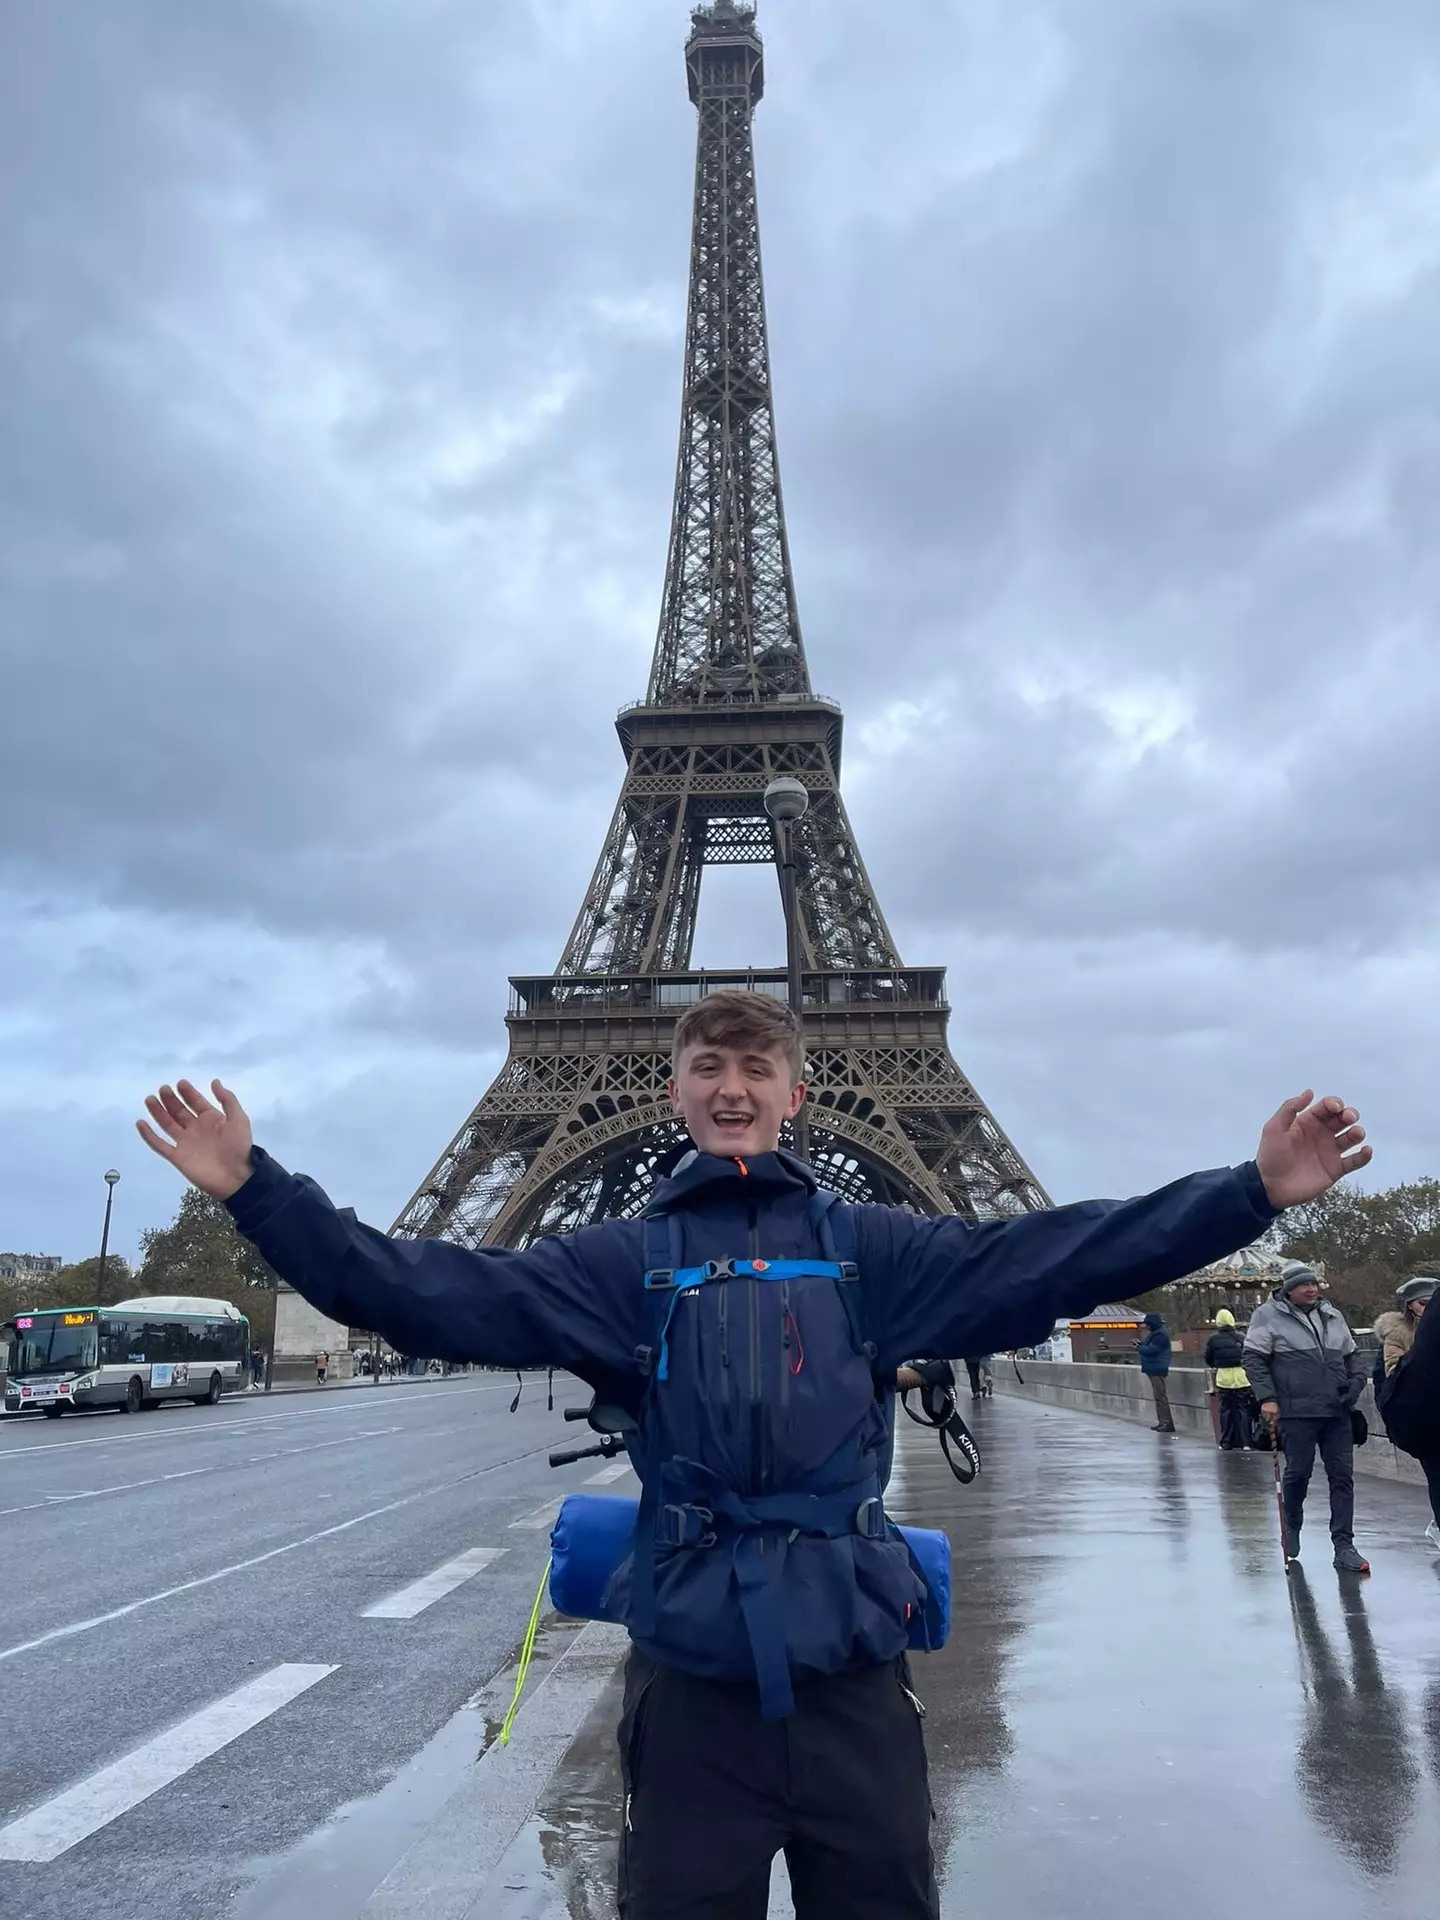 21-year-old Henry Moores has previously walked to Paris.